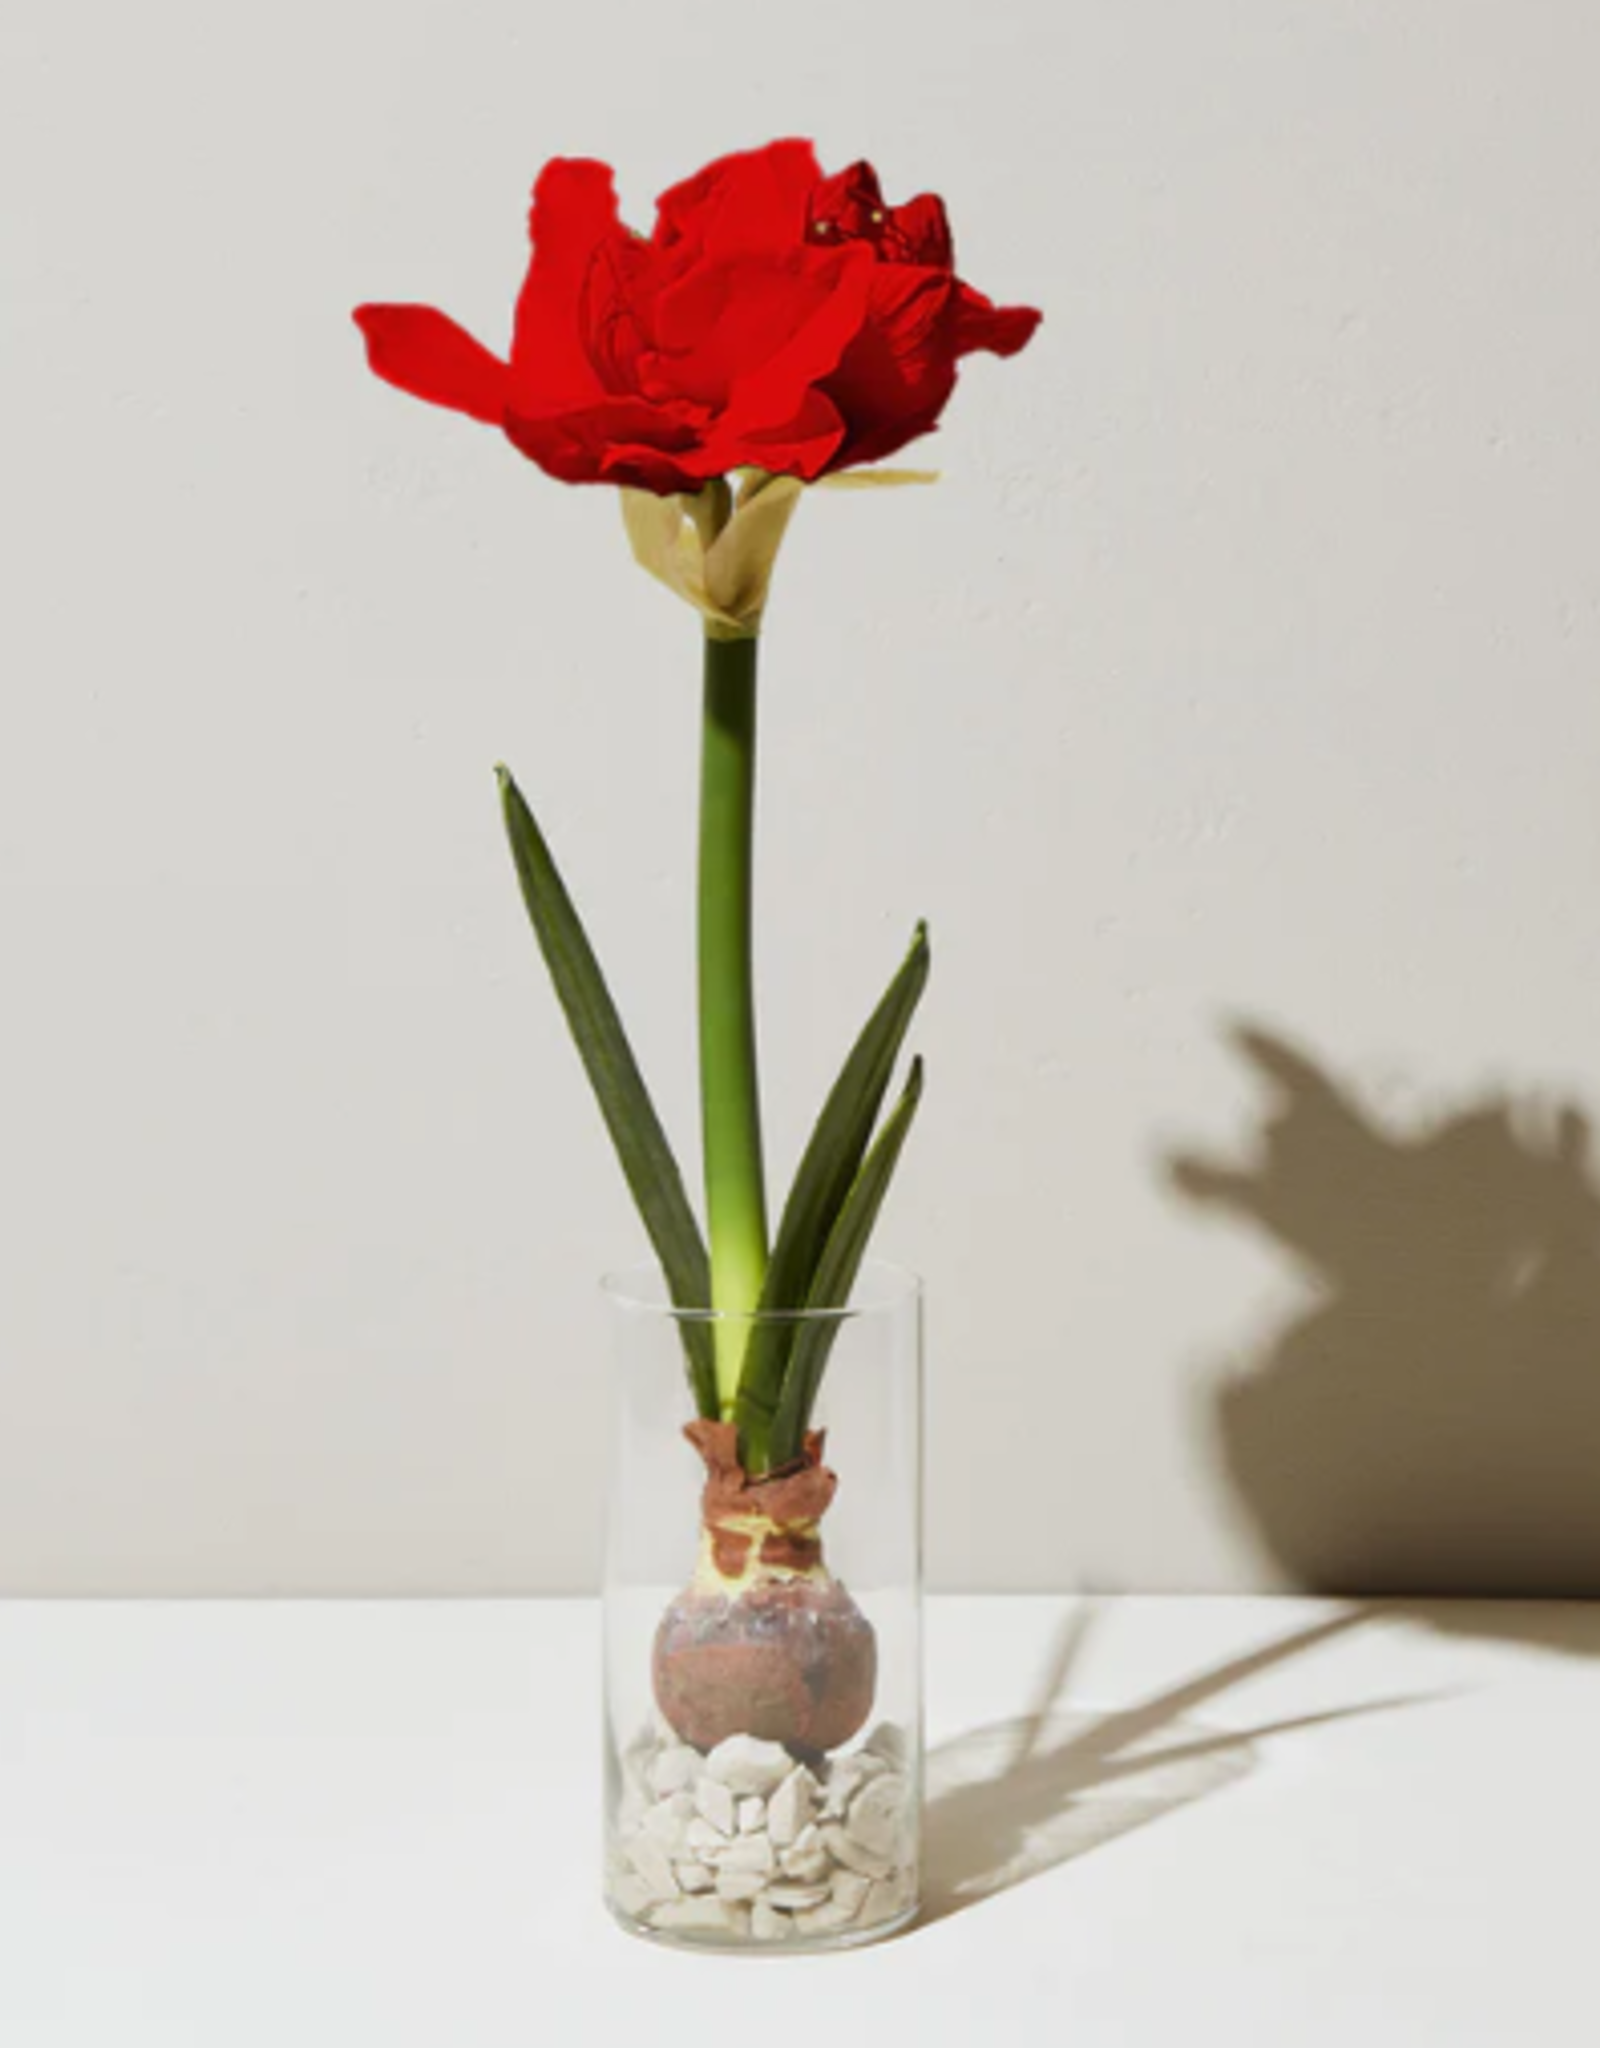 Modern Sprout Winter Bulb Kit - Red Amaryllis